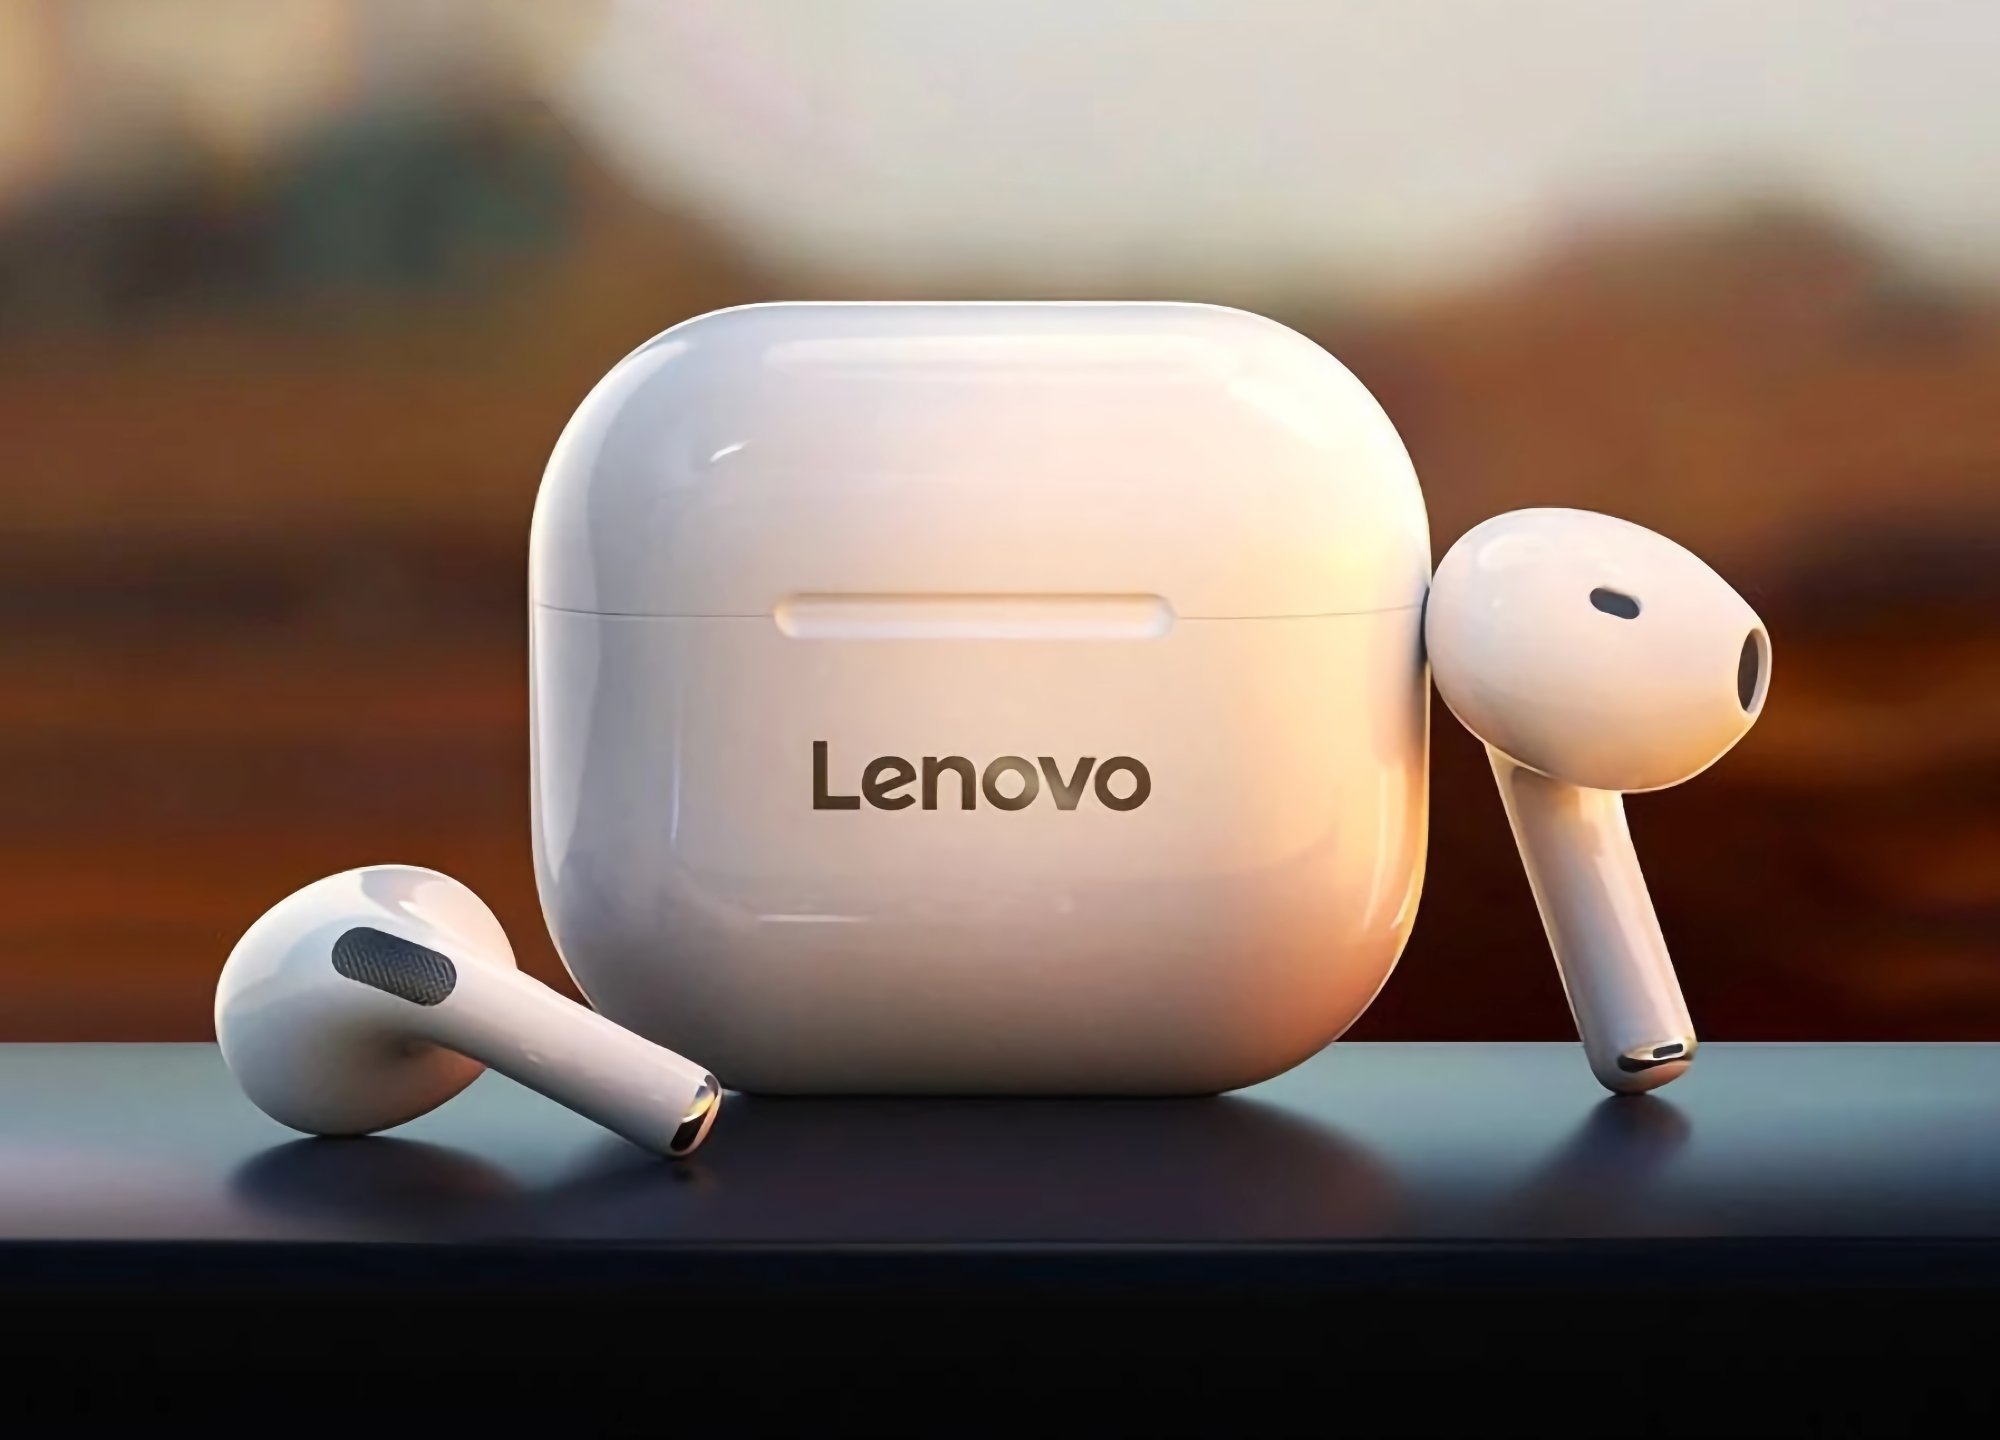 Lenovo LP40 on AliExpress: TWS headphones with design like AirPods 3, IPX5 protection, USB-C port and battery life up to 20 hours for $11